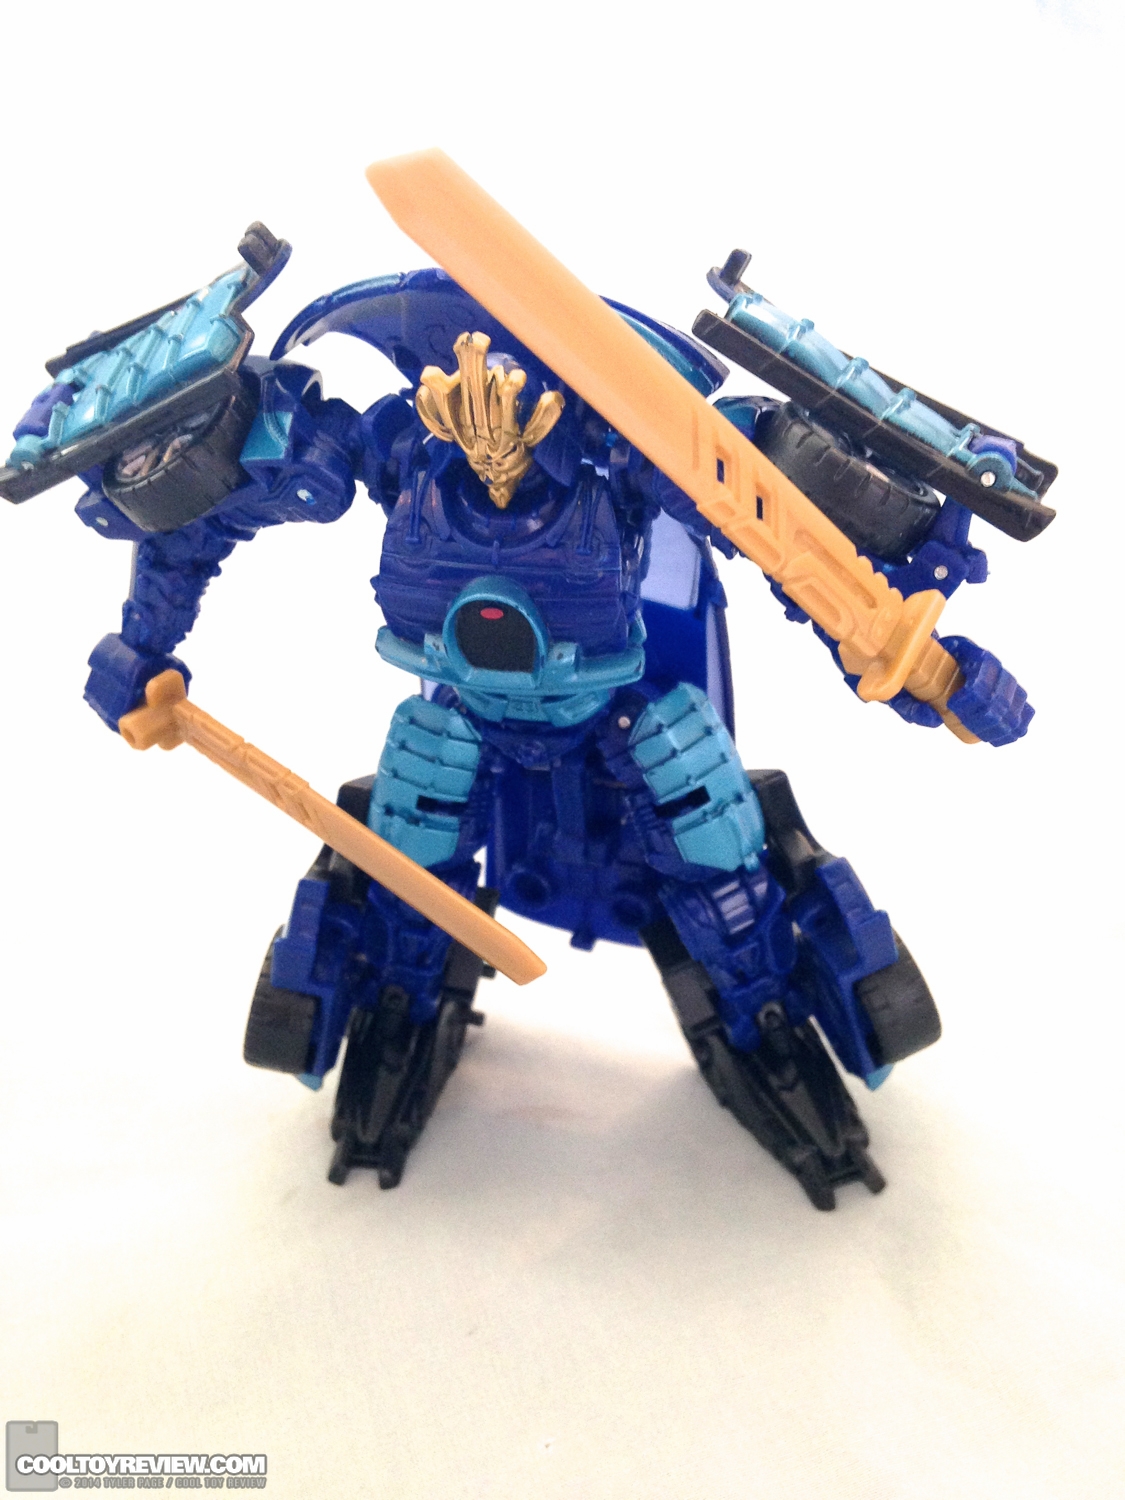 Transformers-Age-of-Extinction-Hasbro-Action-Figures-Review-012.jpg